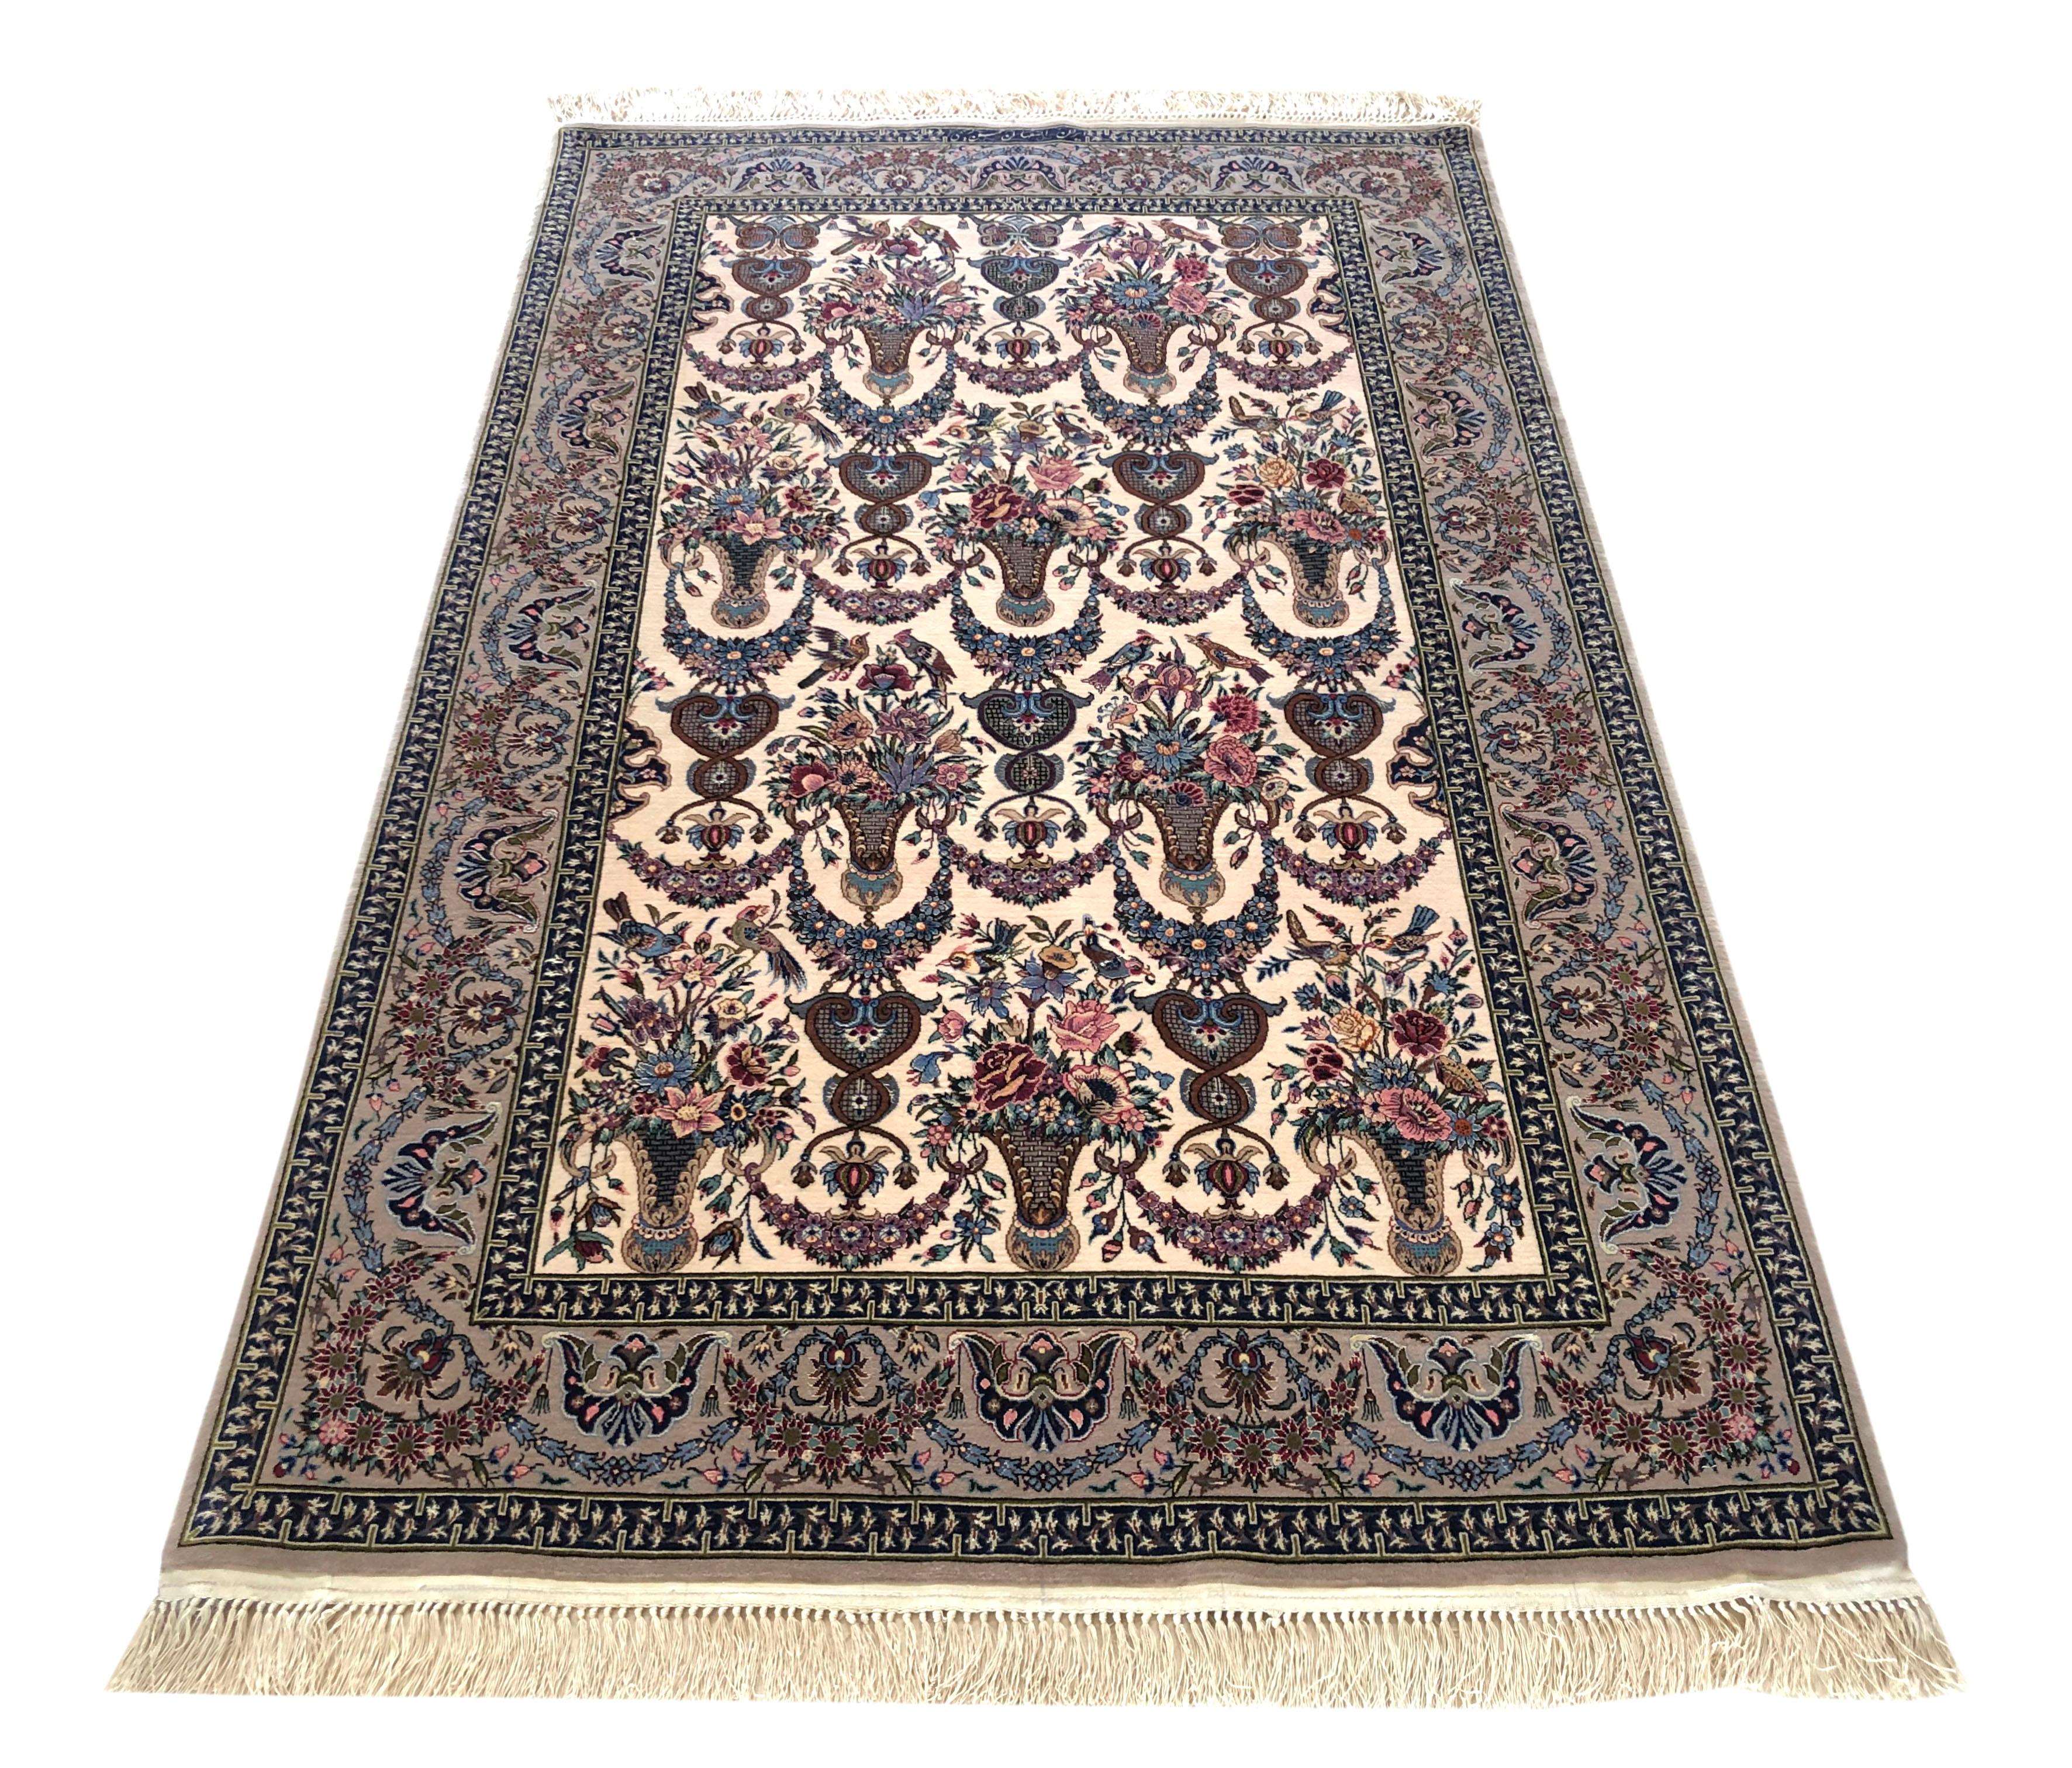 This authentic Persian Isfahan rug has wool and silk pile on silk foundation is a stunning example of a floral a-symmetrical vase design rug. This magnificent piece is most noticeable in its quality and color combination. This rug has signed by